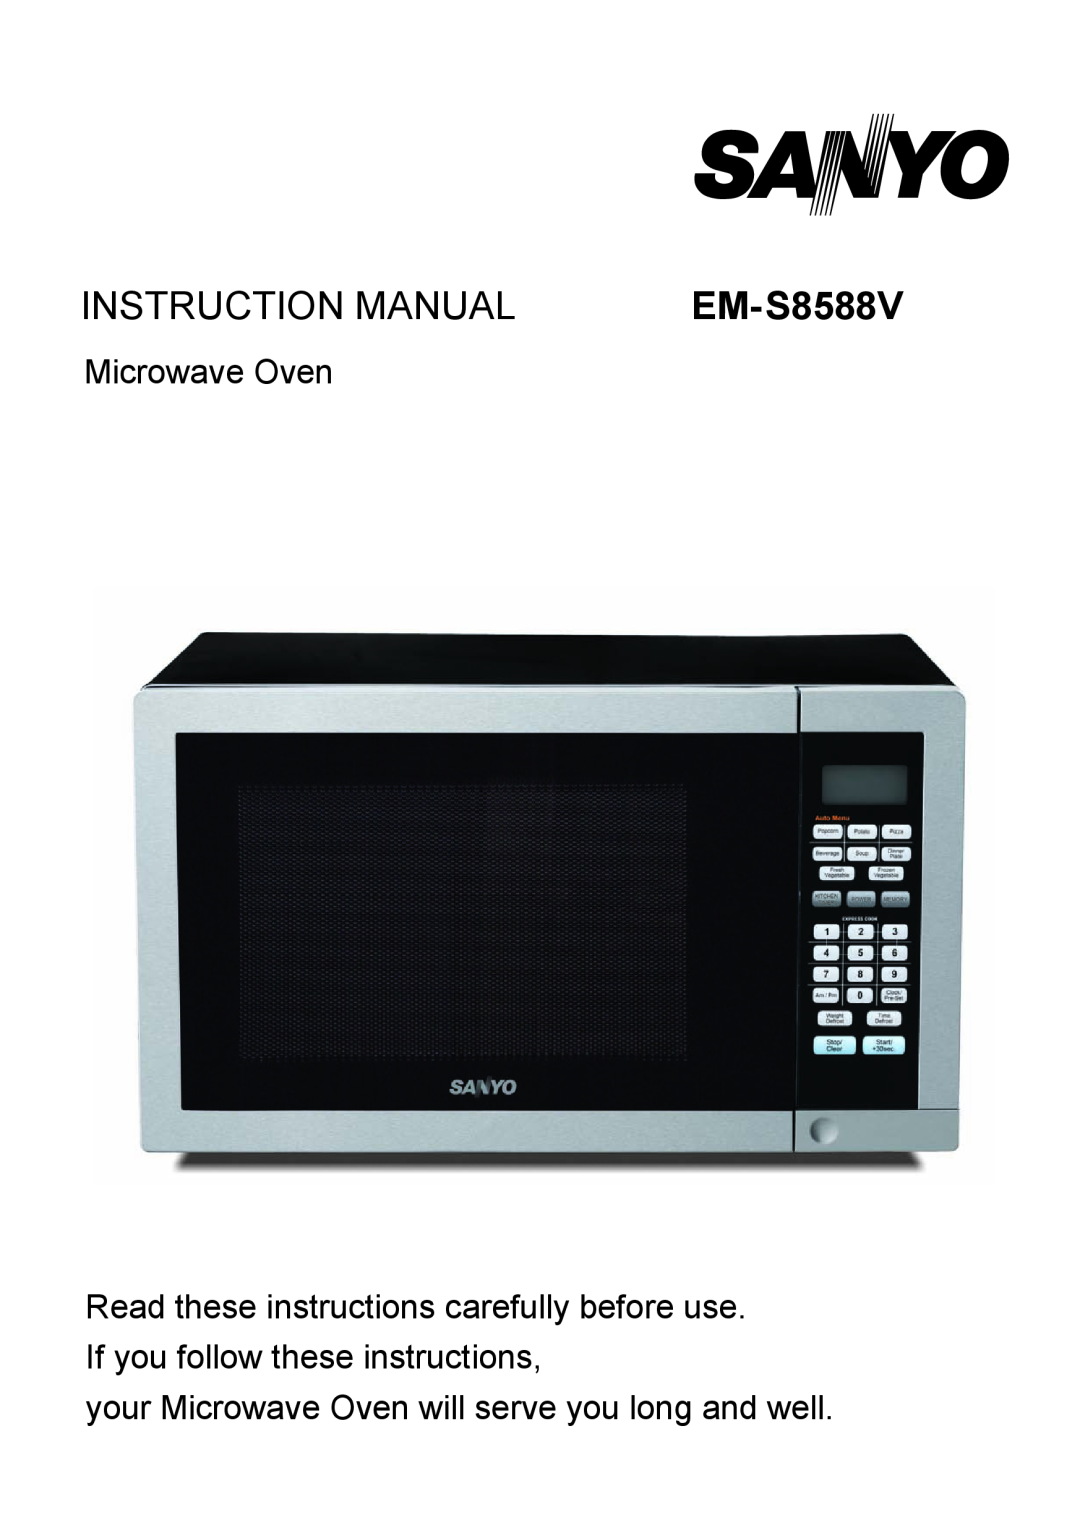 Sanyo EM-S8588V instruction manual your Microwave Oven will serve you long and well 